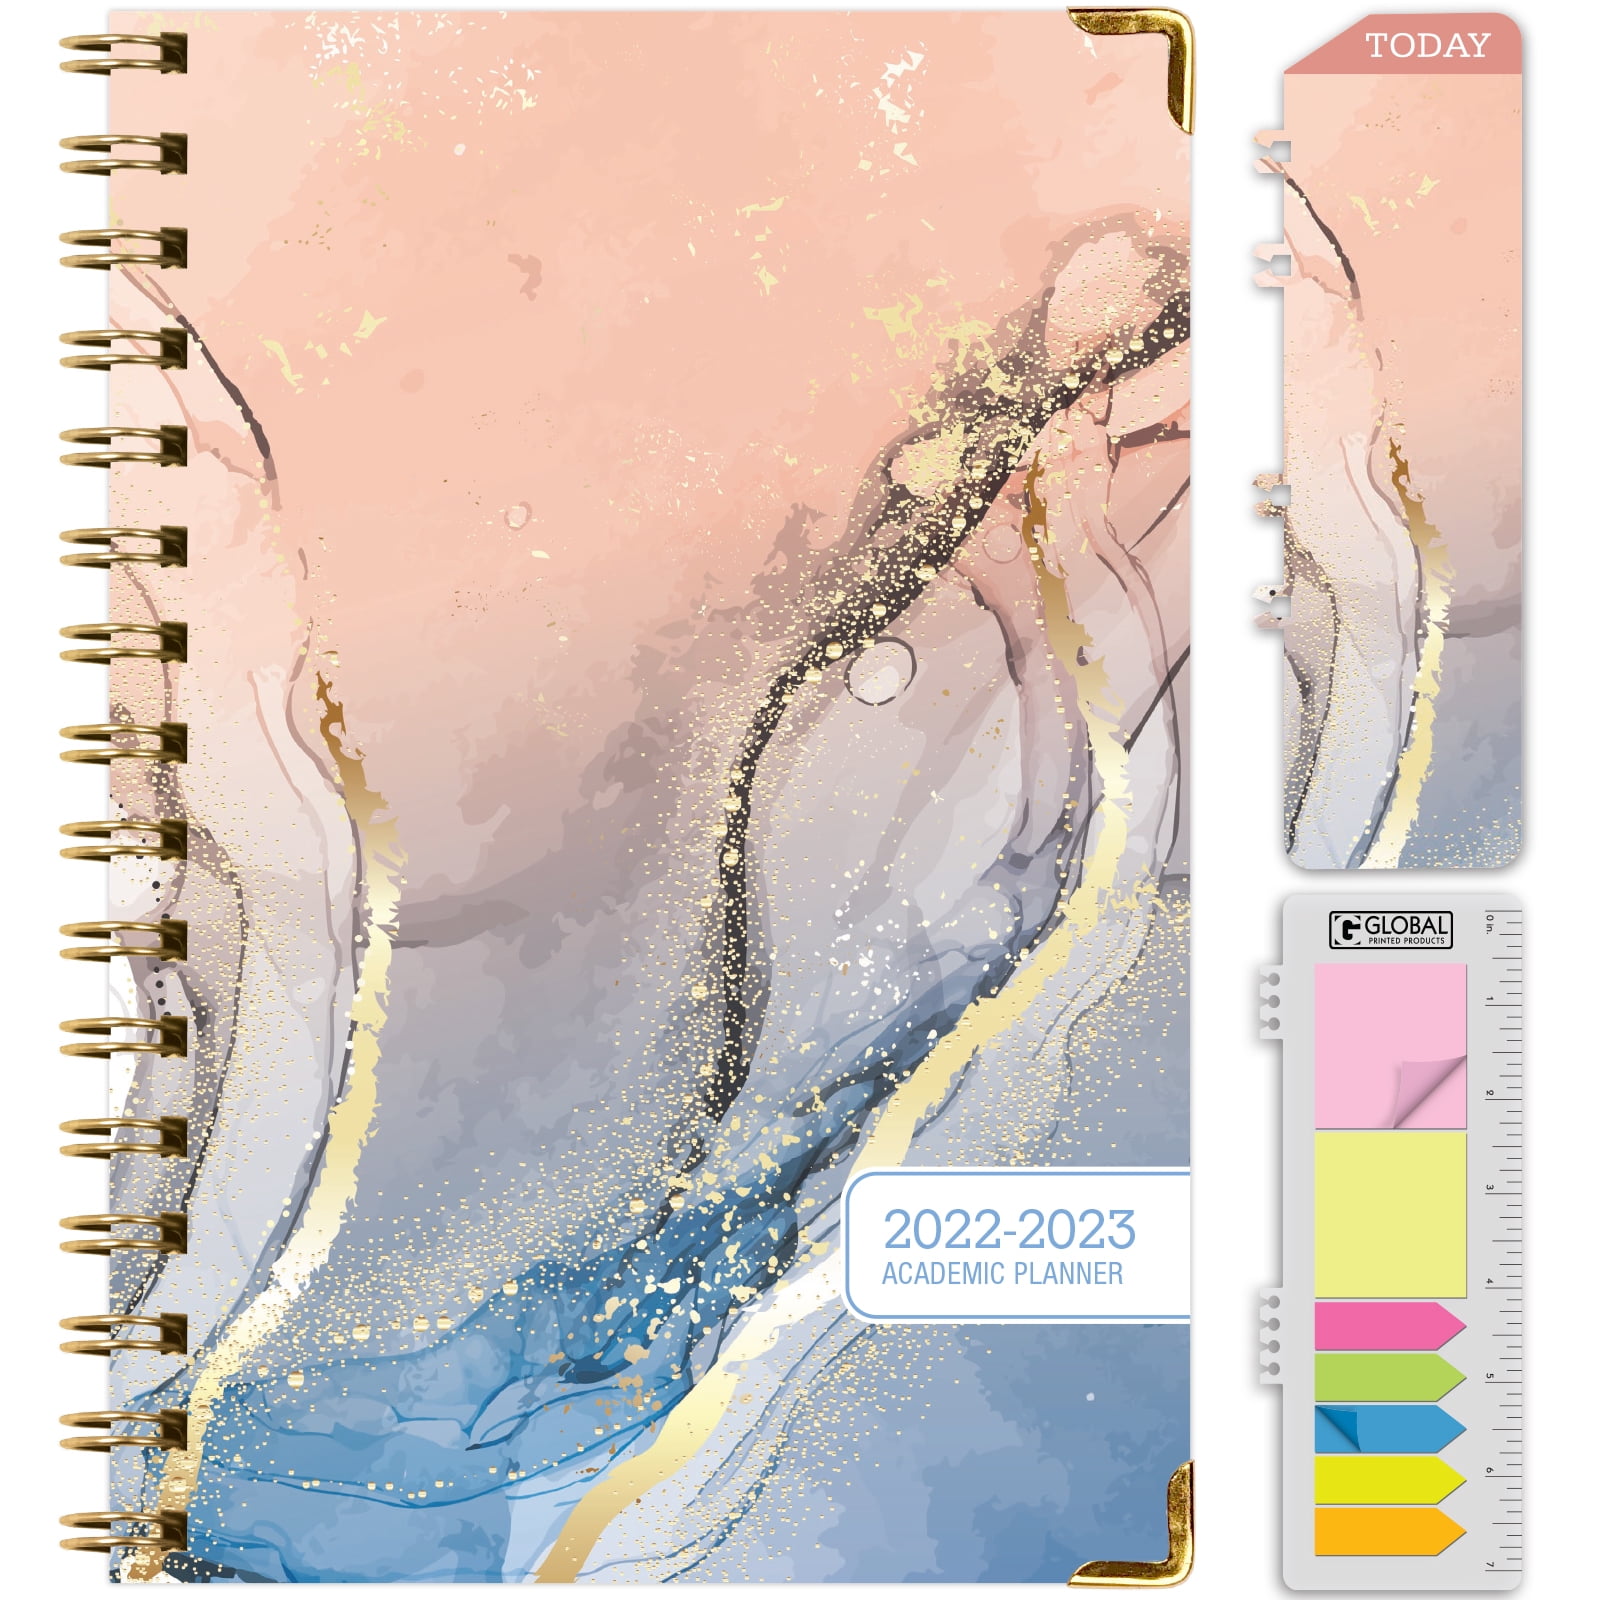 Bonus Bookmark November 2019 Through December 2020 HARDCOVER Calendar Year 2020 Planner: Pocket Folder and Sticky Note Set 5.5x8 Daily Weekly Monthly Planner Yearly Agenda Pineapples 